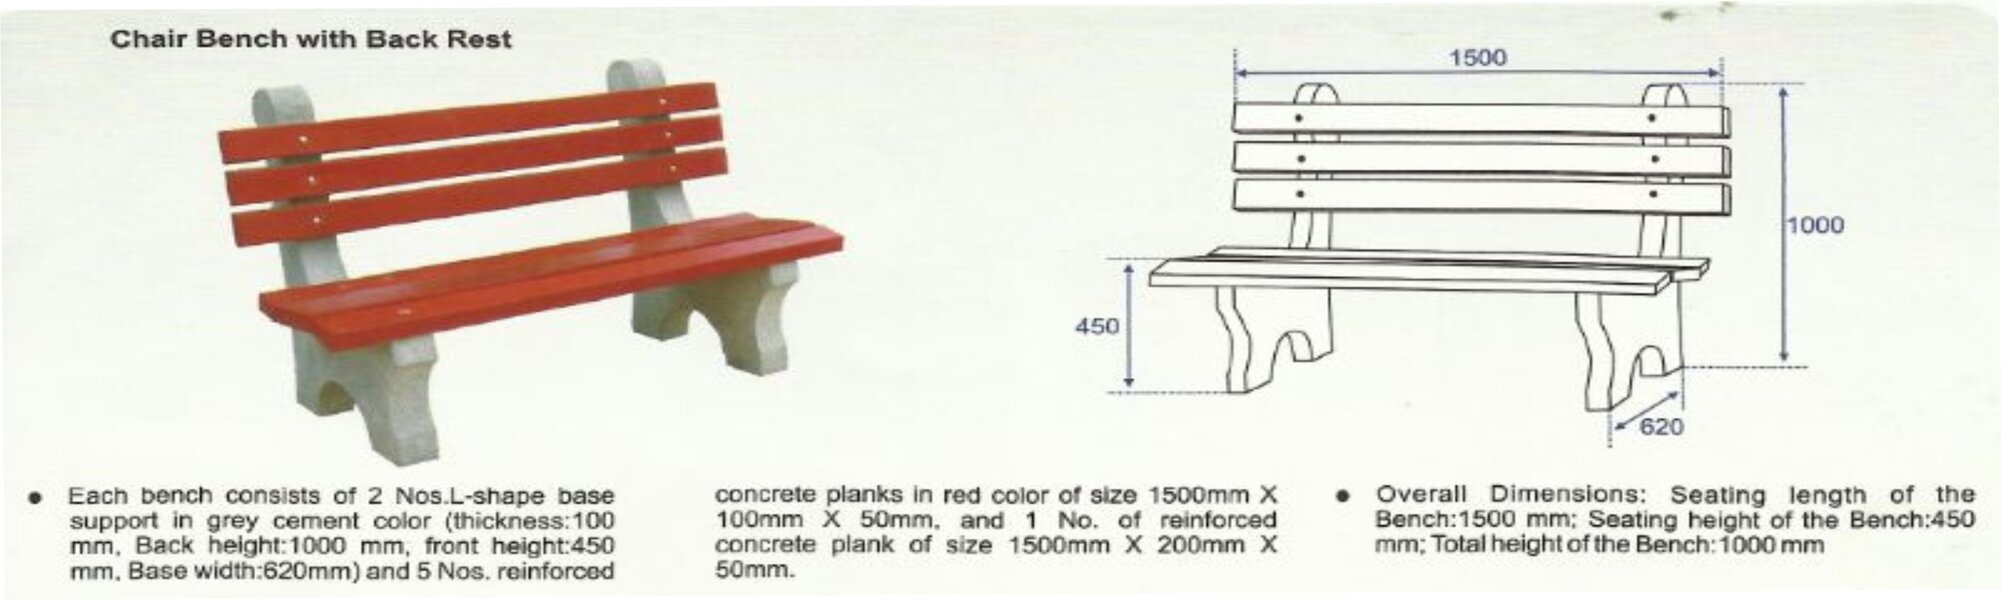 CHAIR BENCH WITH BACK REST & DETAILS  001.jpg